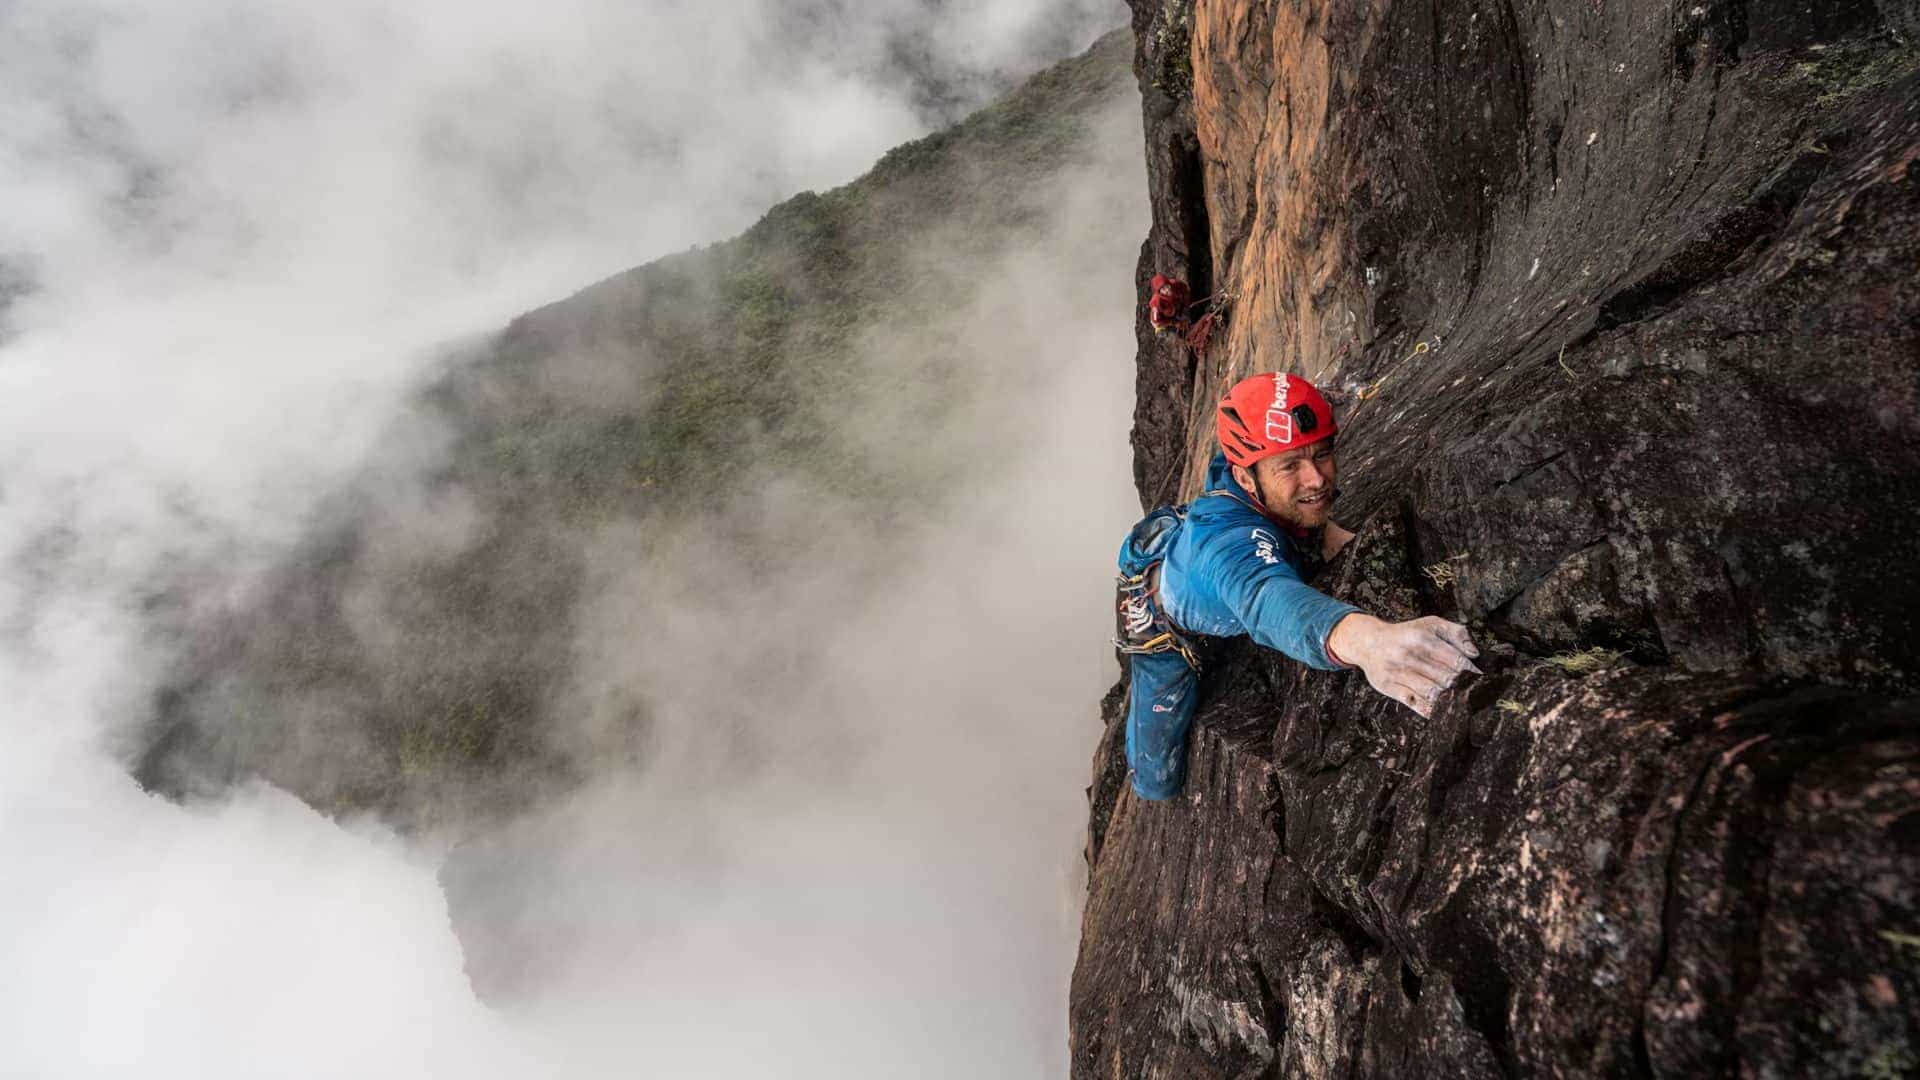 Leo Houlding - Closer To The Edge